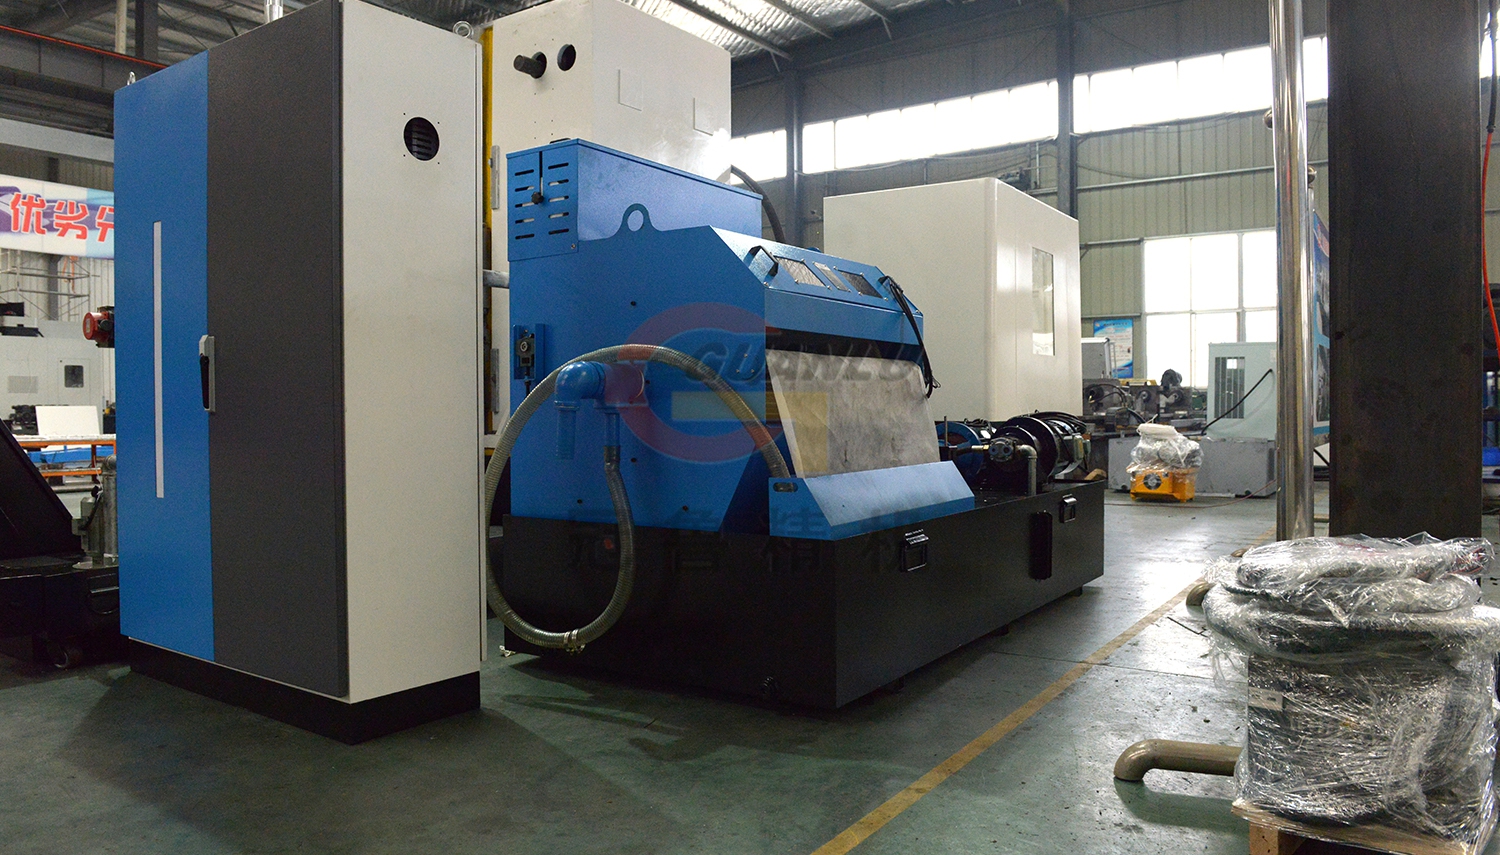 3D deep hole drilling machine for molds industry